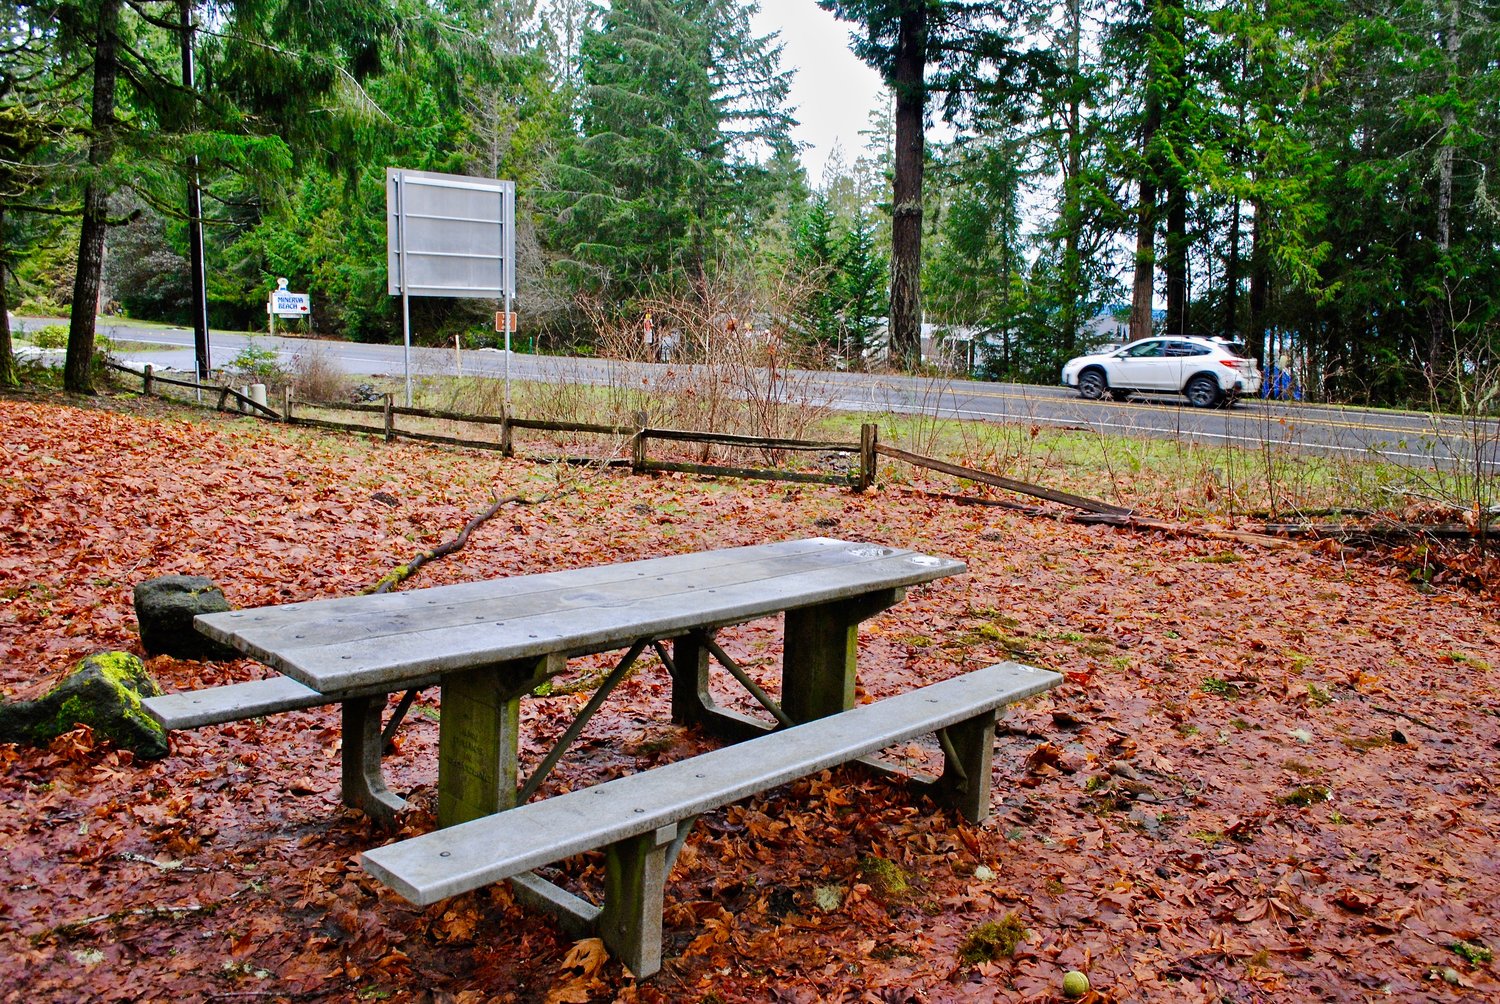 Picnic table near busy state highway provides sanctuary for the weary driver. However, this table, though blessedly near, is only attained when camping overnight and paying a state park camping fee.